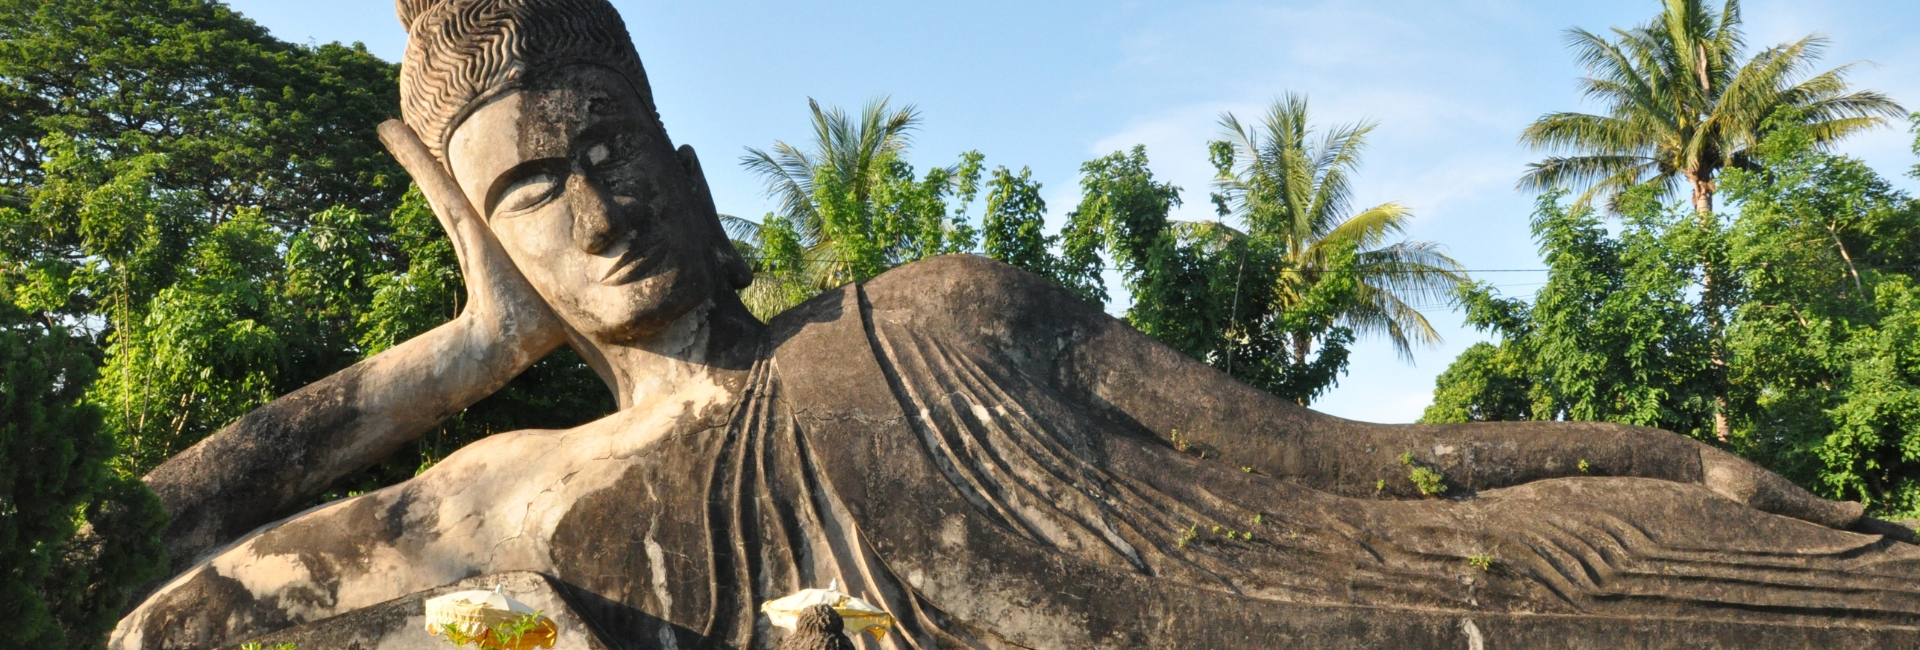 Visit Xieng Khuan: A Complete Guide to Buddha Park in Vientiane